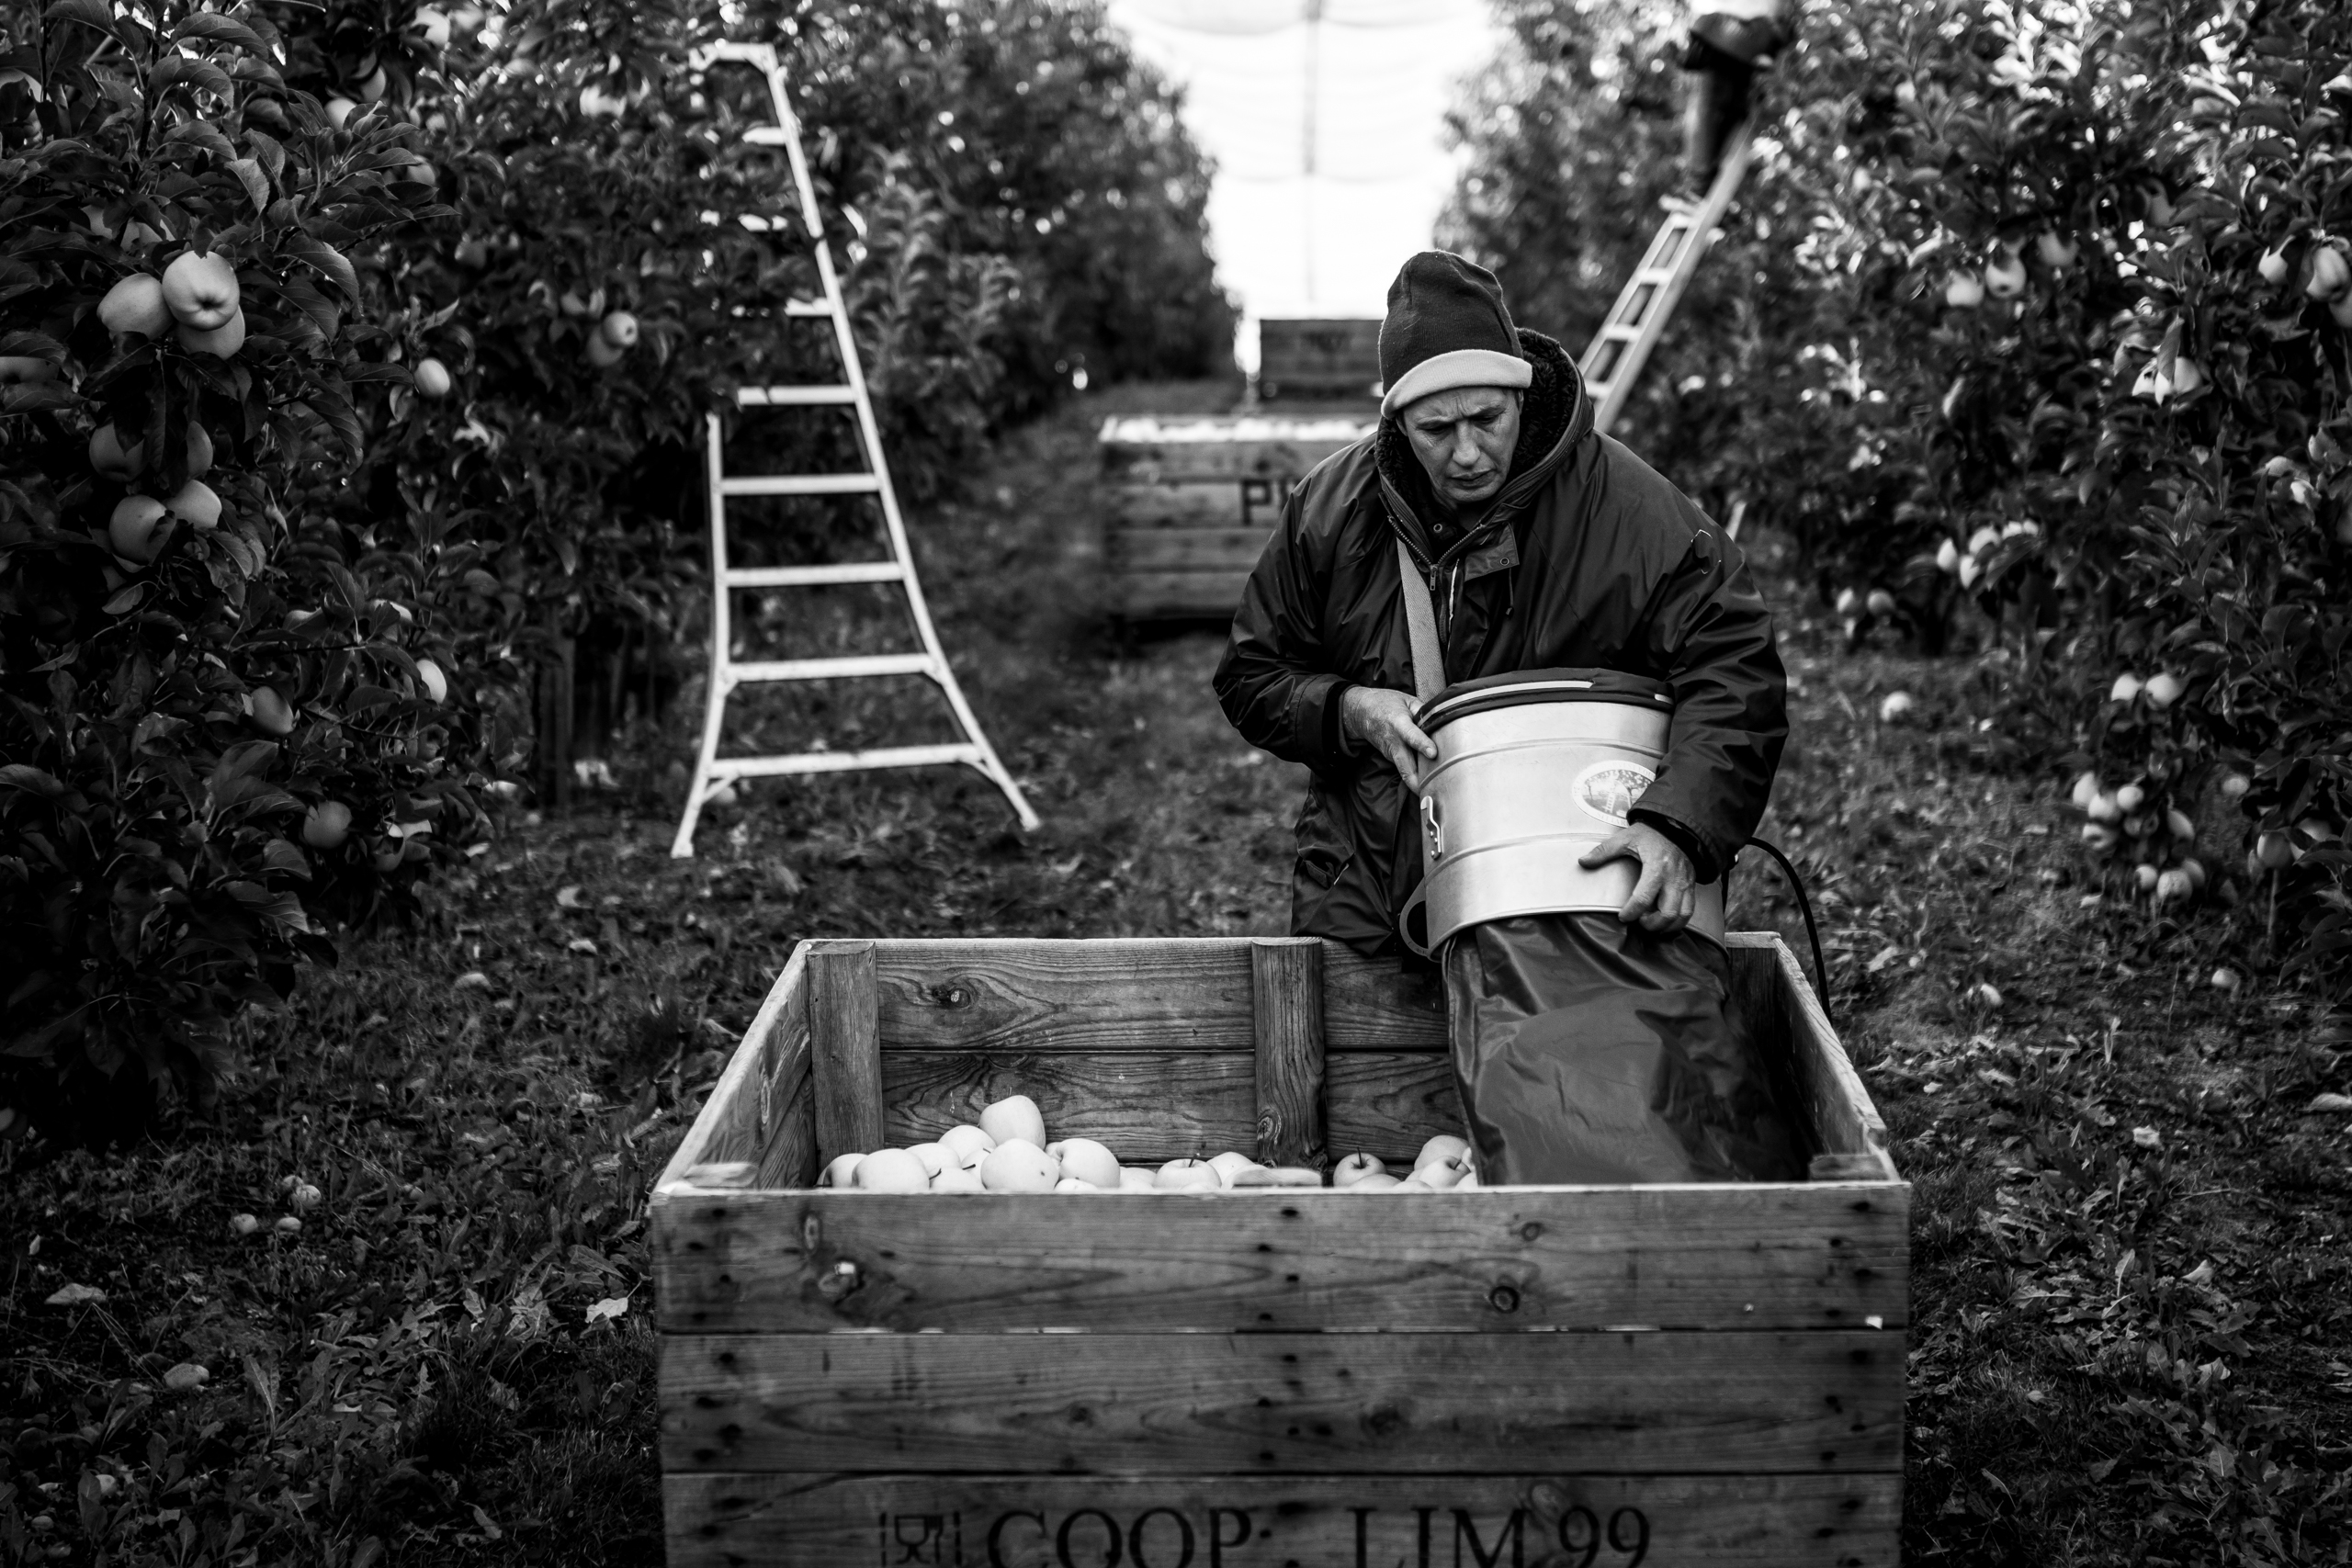 The collection of the apple in France is a seasonal work that takes place between the months of September and October.